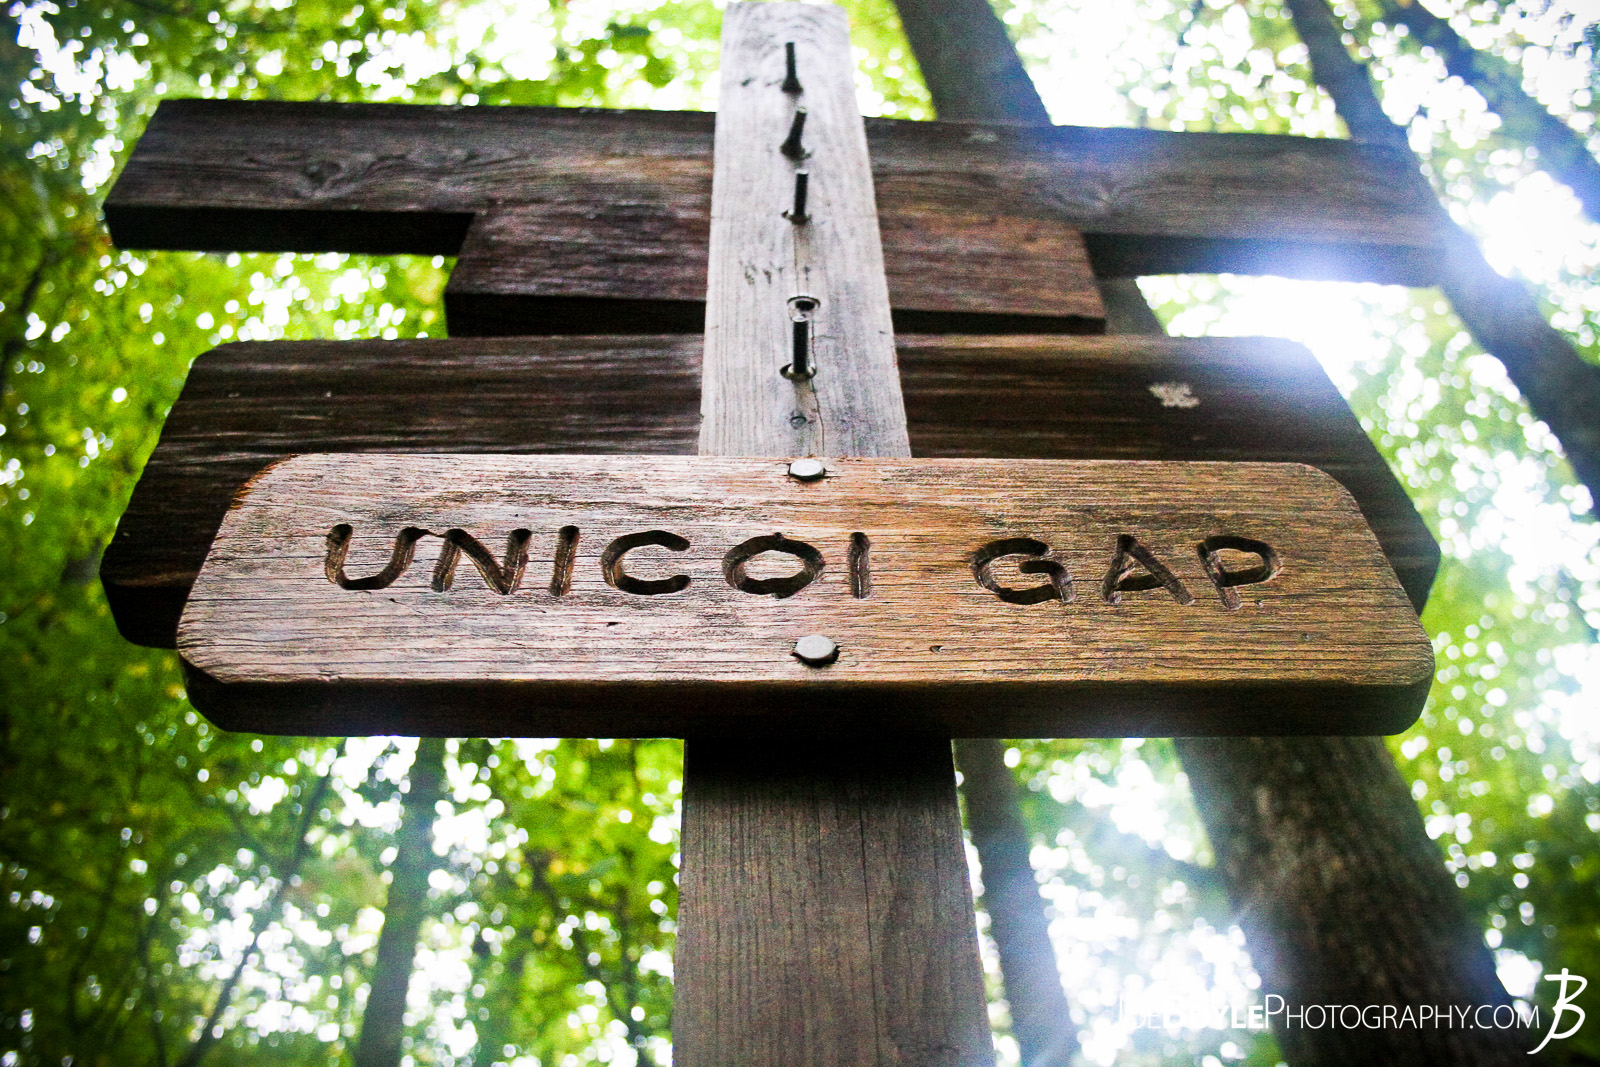  As I was hiking a segment of the Appalachian Trail we ended at Unicoi Gap. It was a hard trek for me as it was one of my first week long backpacking trips so making it to the "finish line" was a welcome sight! 